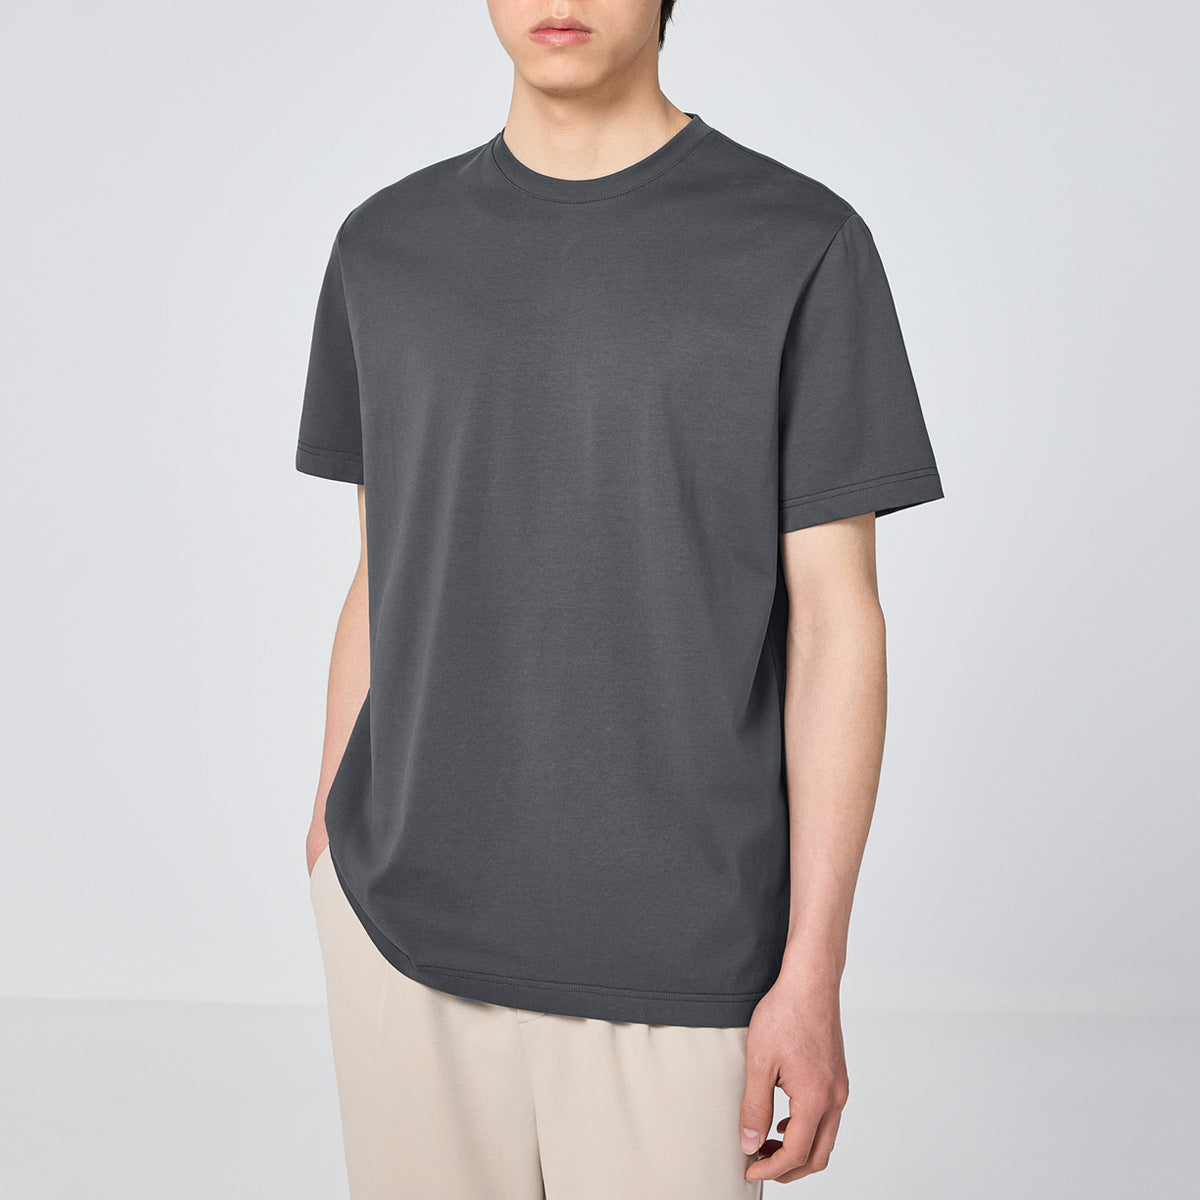 Solid Color Round Neck T-shirt Basic Cool Feeling